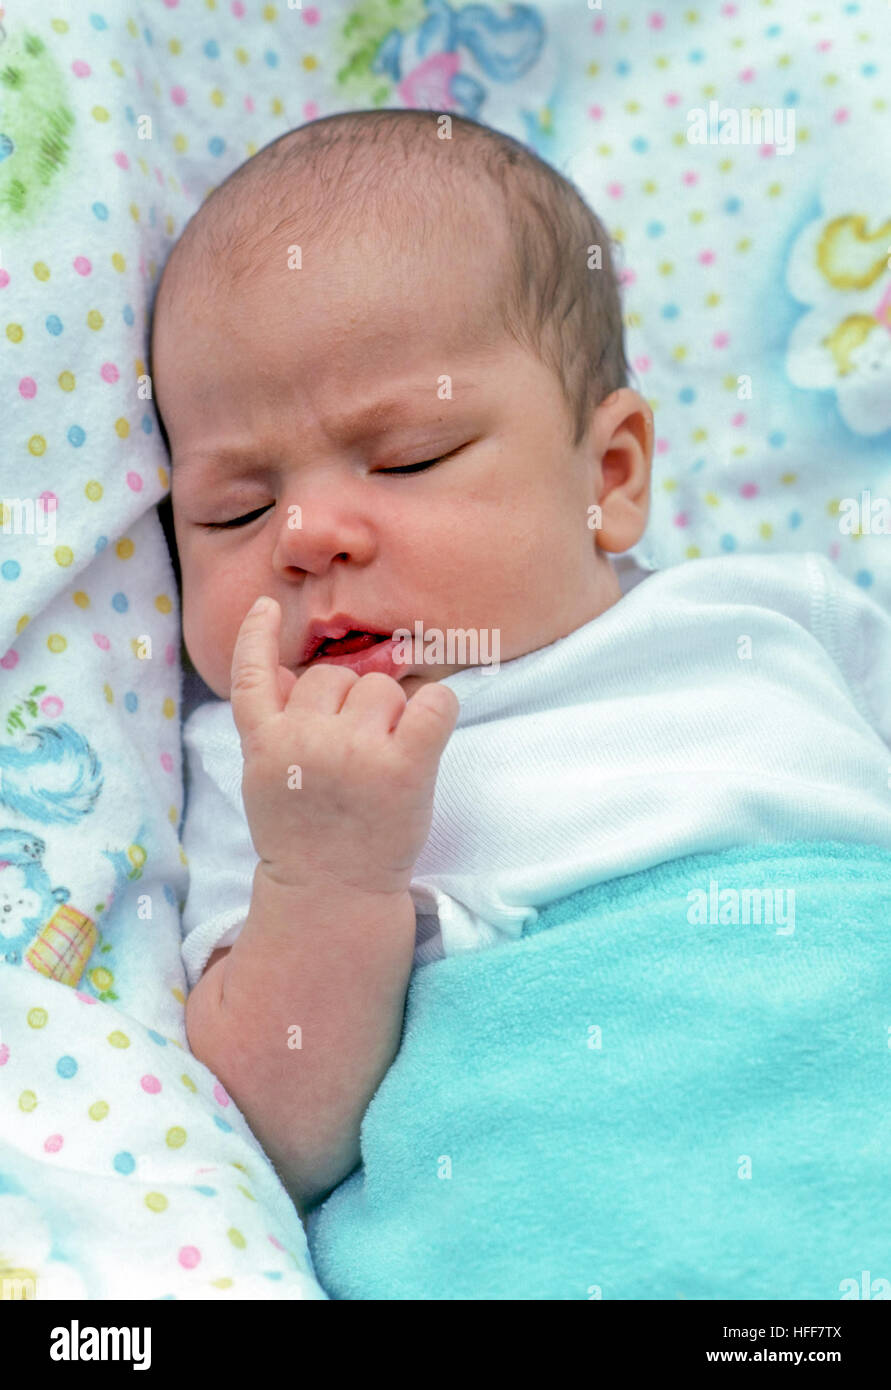 Infant baby boy making expressive faces and gestures as he sleeps. Stock Photo